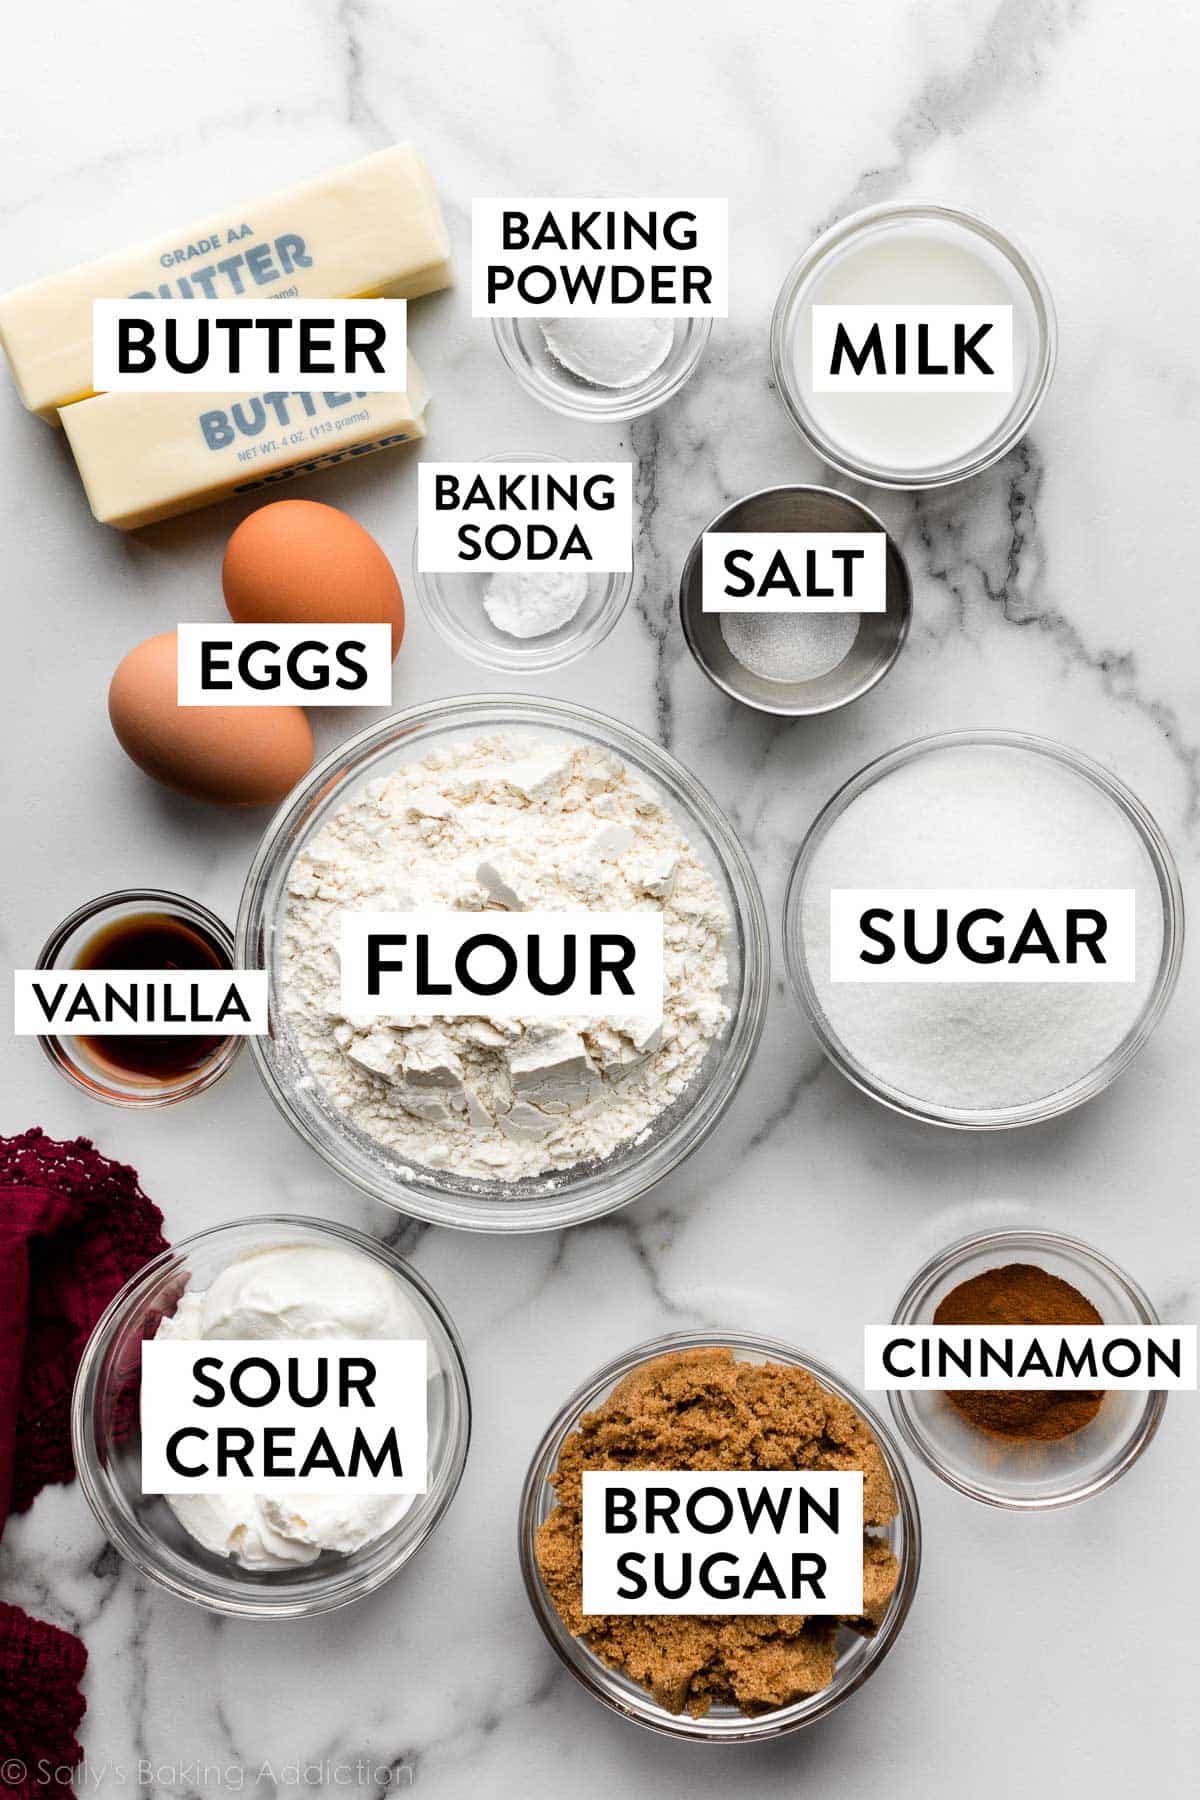 bowls in ingredients on marble counter including flour, sugar, milk, brown sugar, cinnamon, and more.